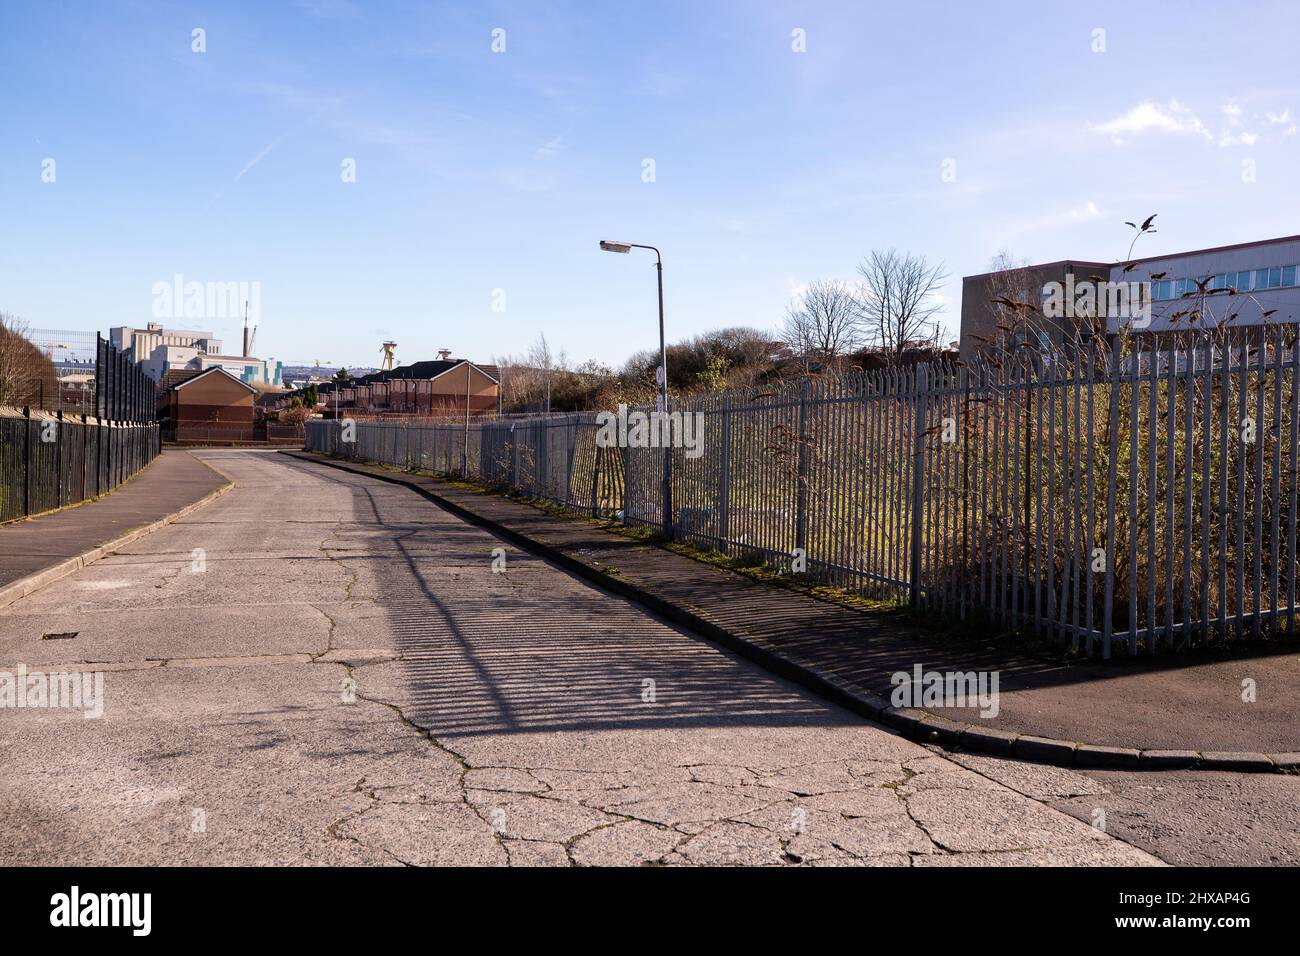 Mountcollyer Street in Belfast, Northern Ireland. where autobiographical coming-of age film 'Belfast' written and directed by Kenneth Branagh is set. Stock Photo